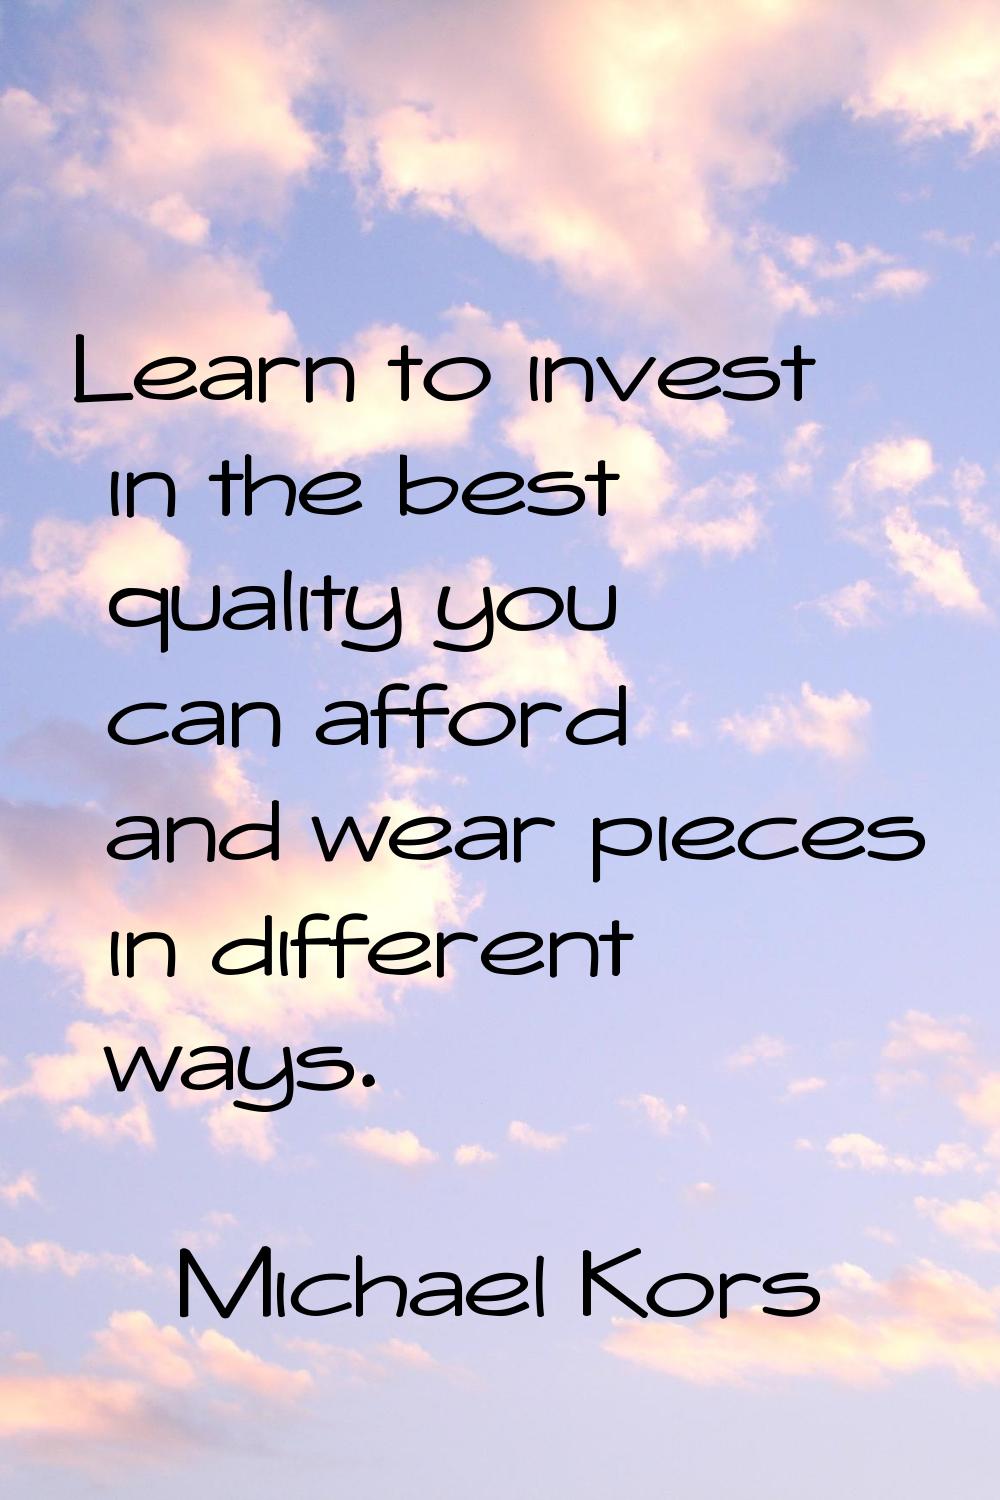 Learn to invest in the best quality you can afford and wear pieces in different ways.